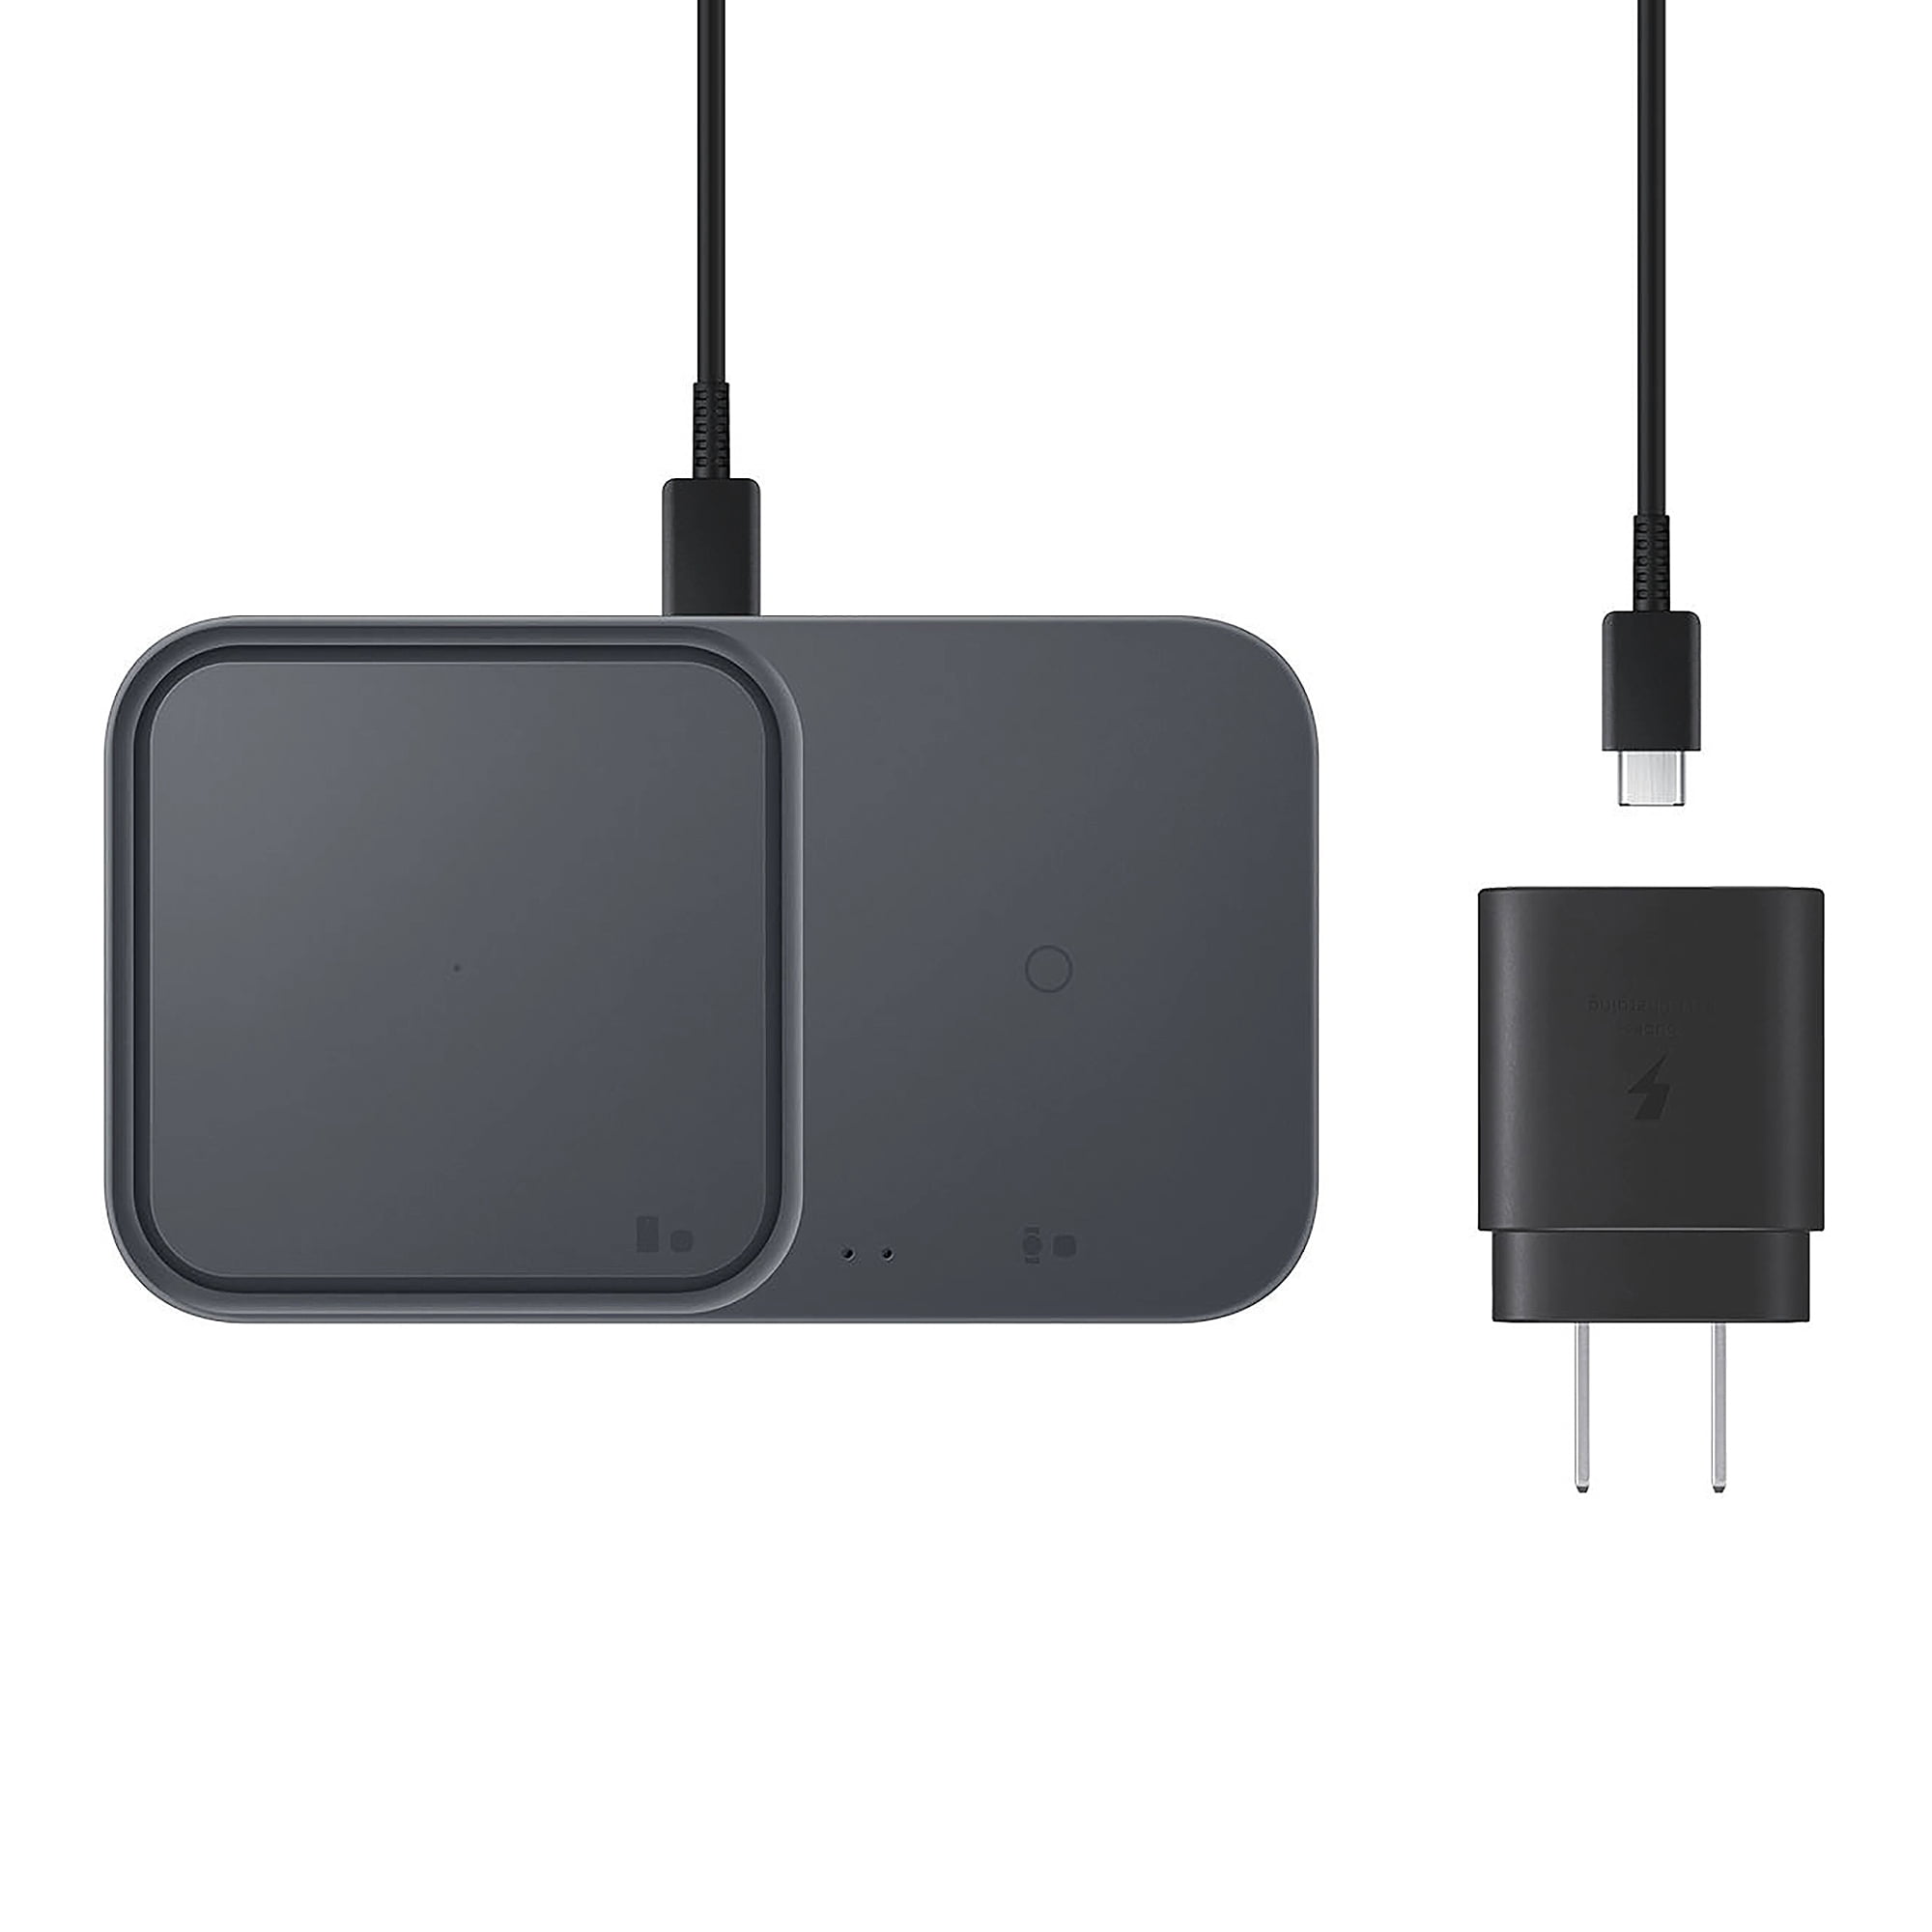 Samsung 15W Super Fast Wireless Charger DUO Pad with Travel